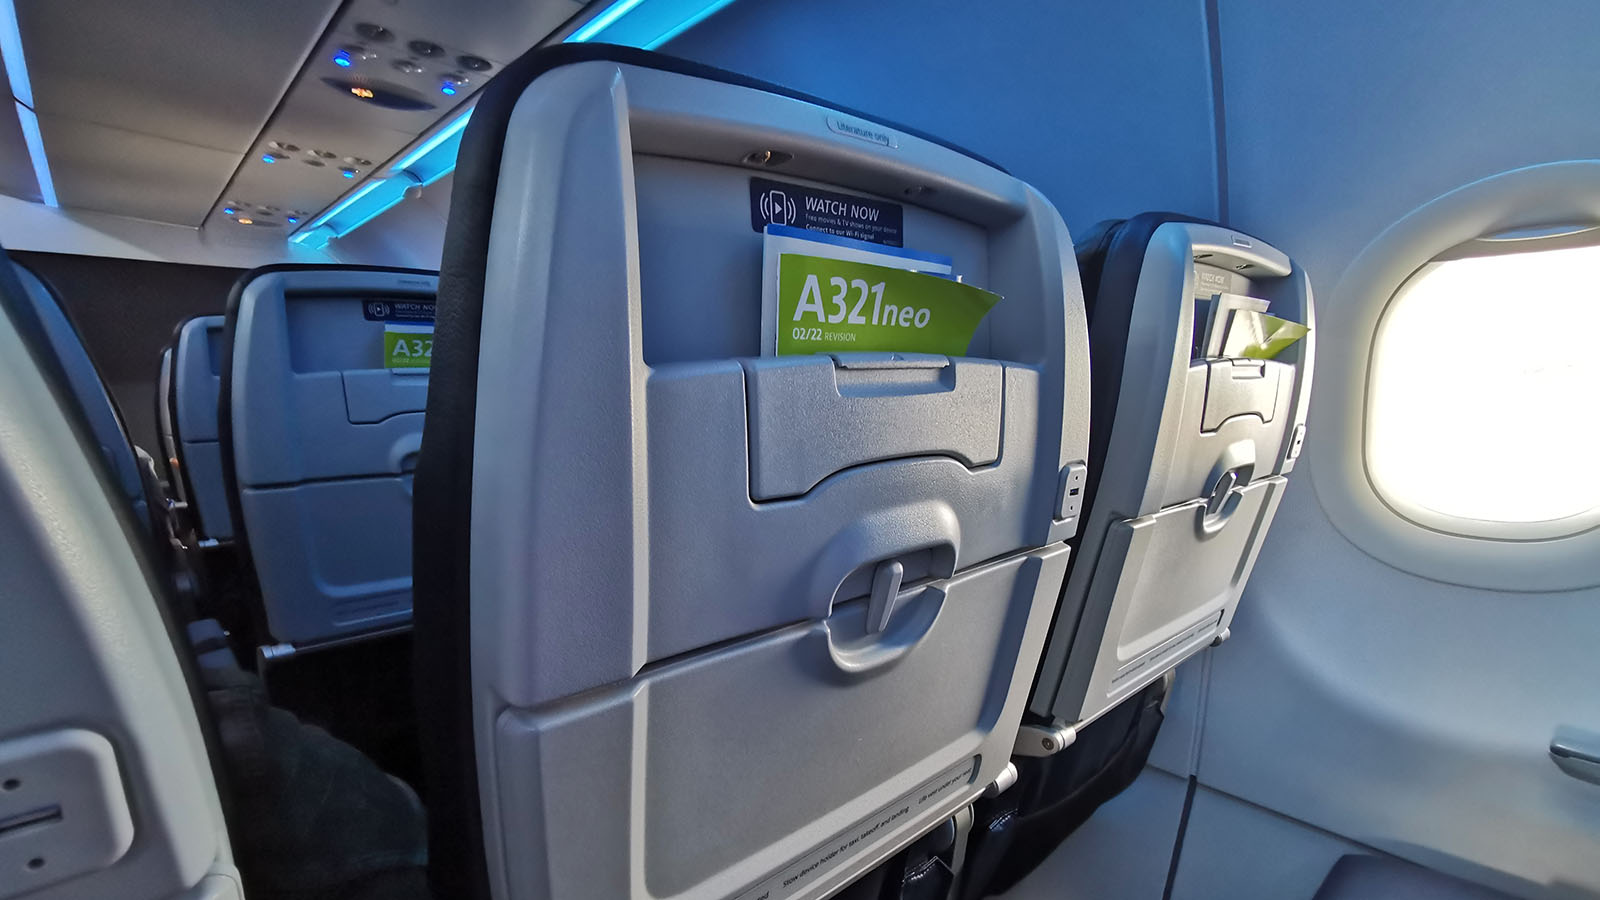 American Airlines Airbus A321neo Economy Class